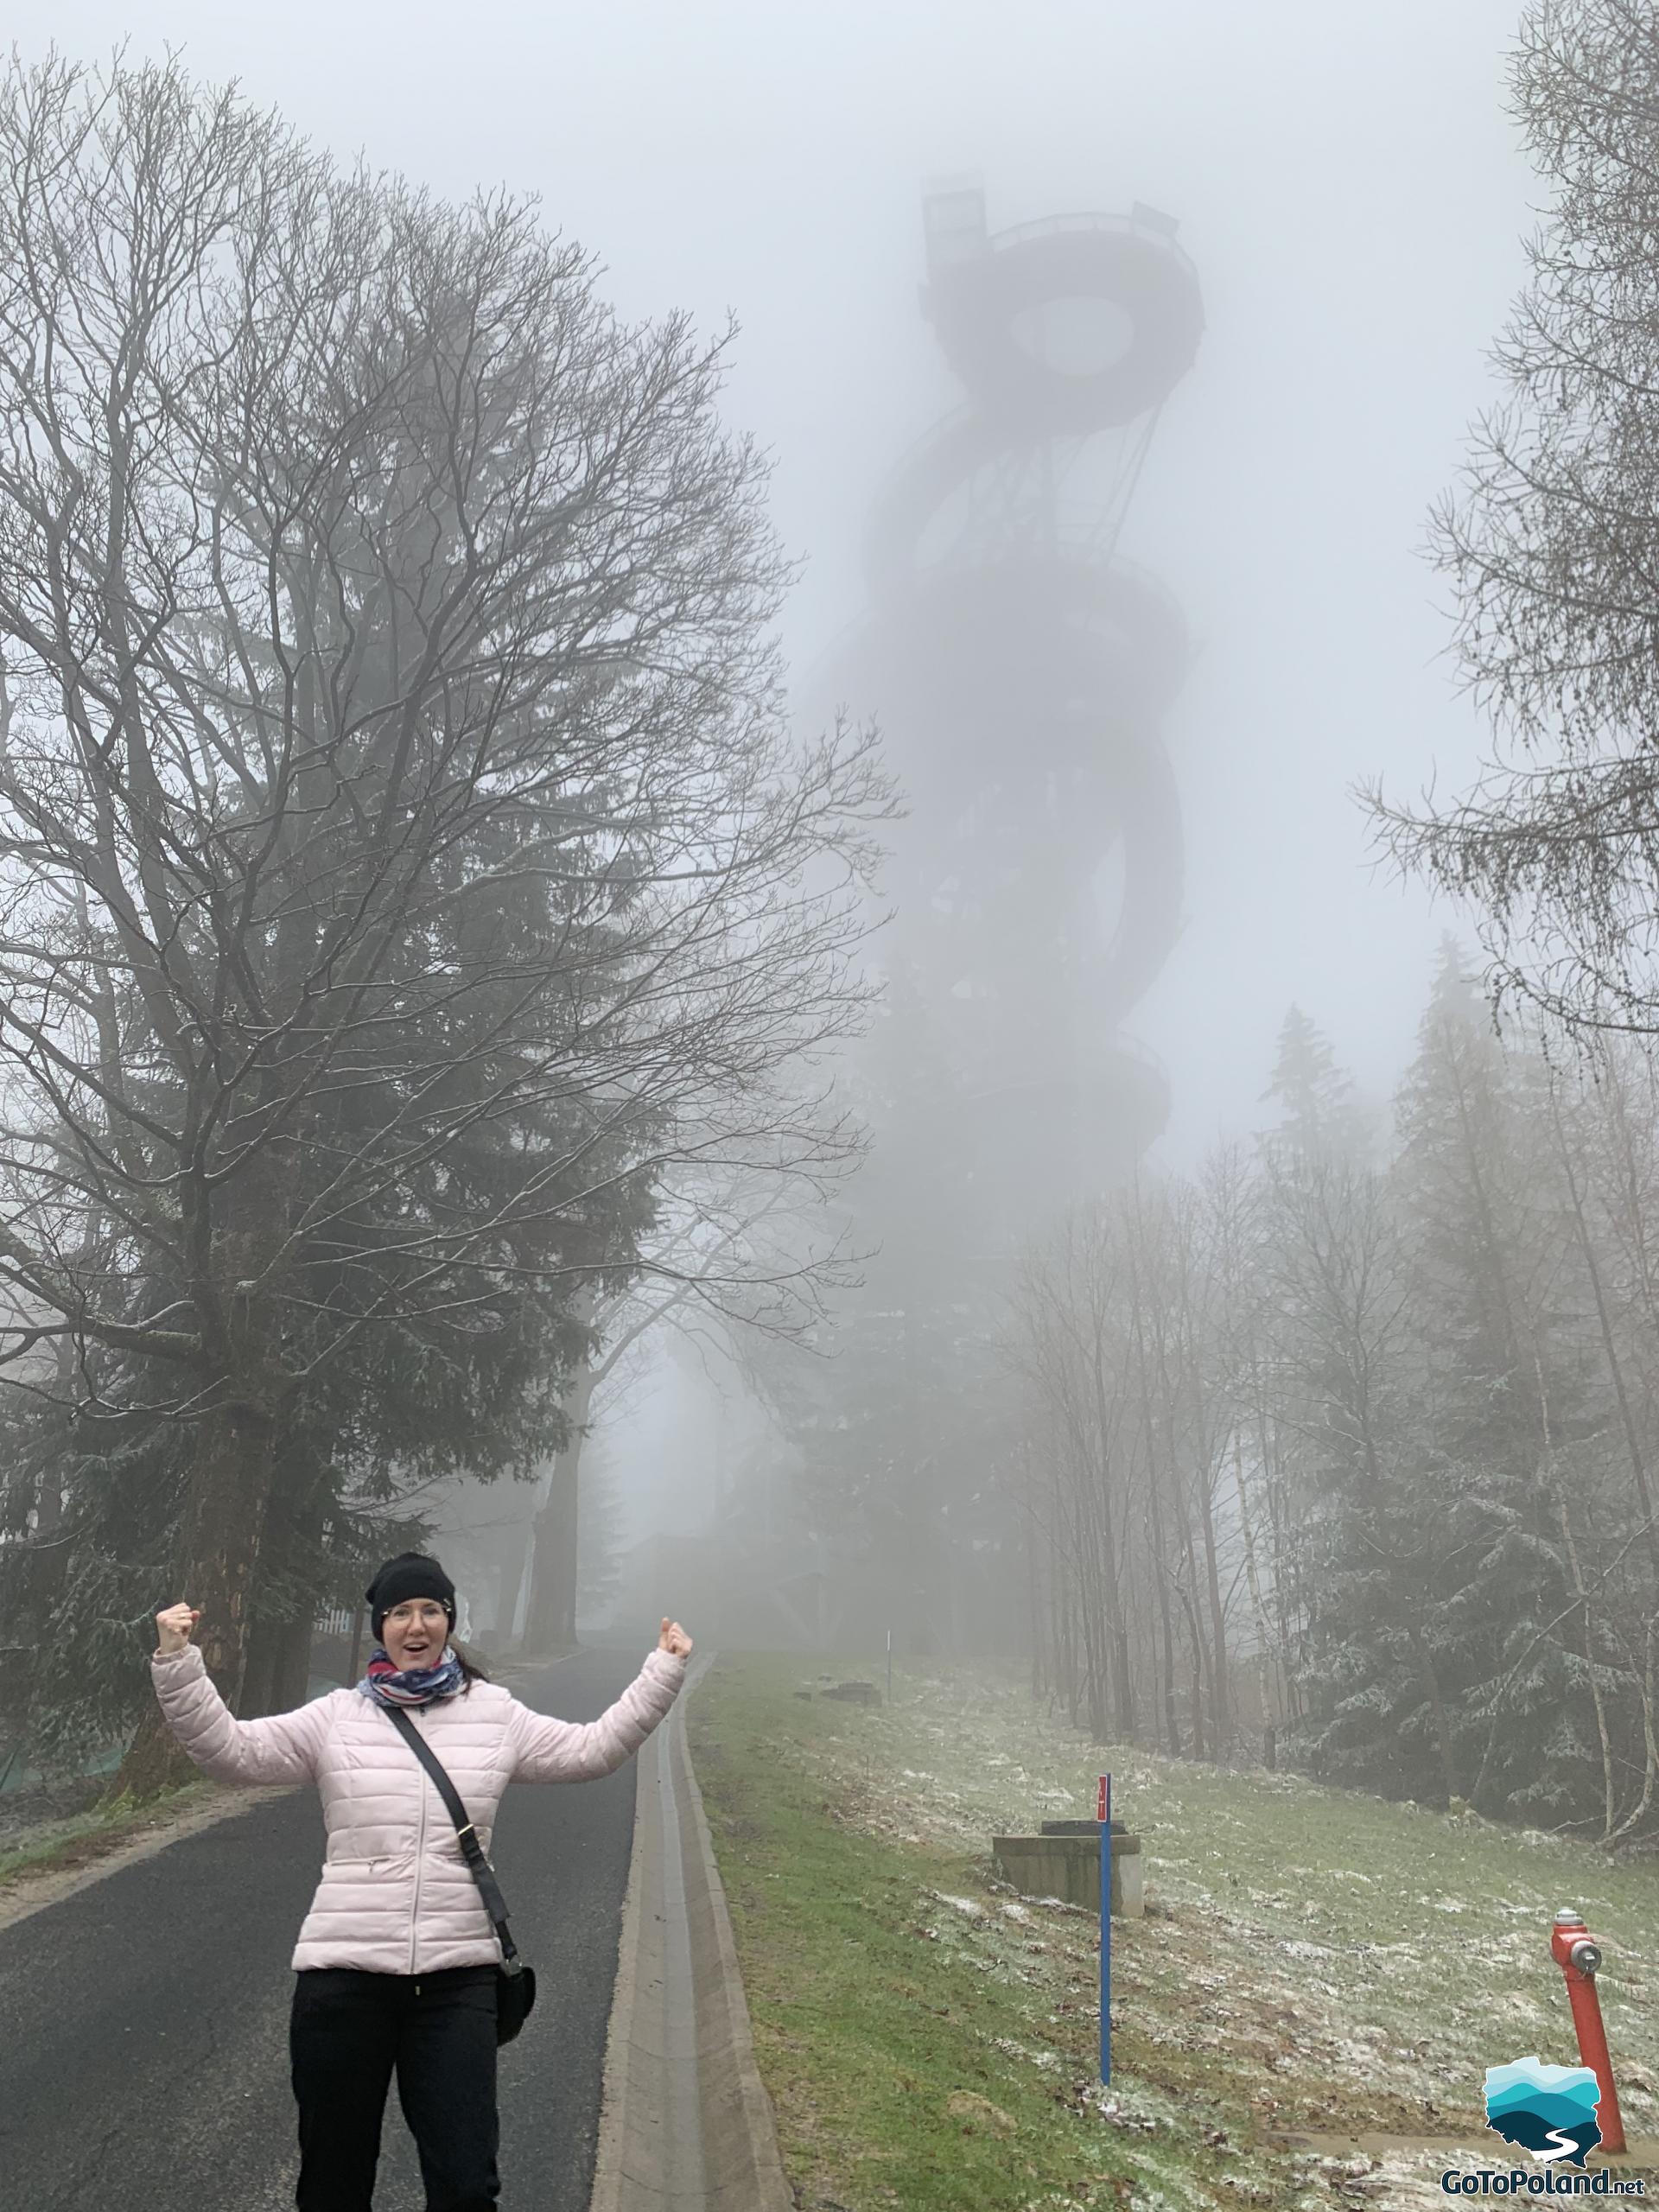 the highest observation tower emerges from the mist, in front of which a woman is standing  